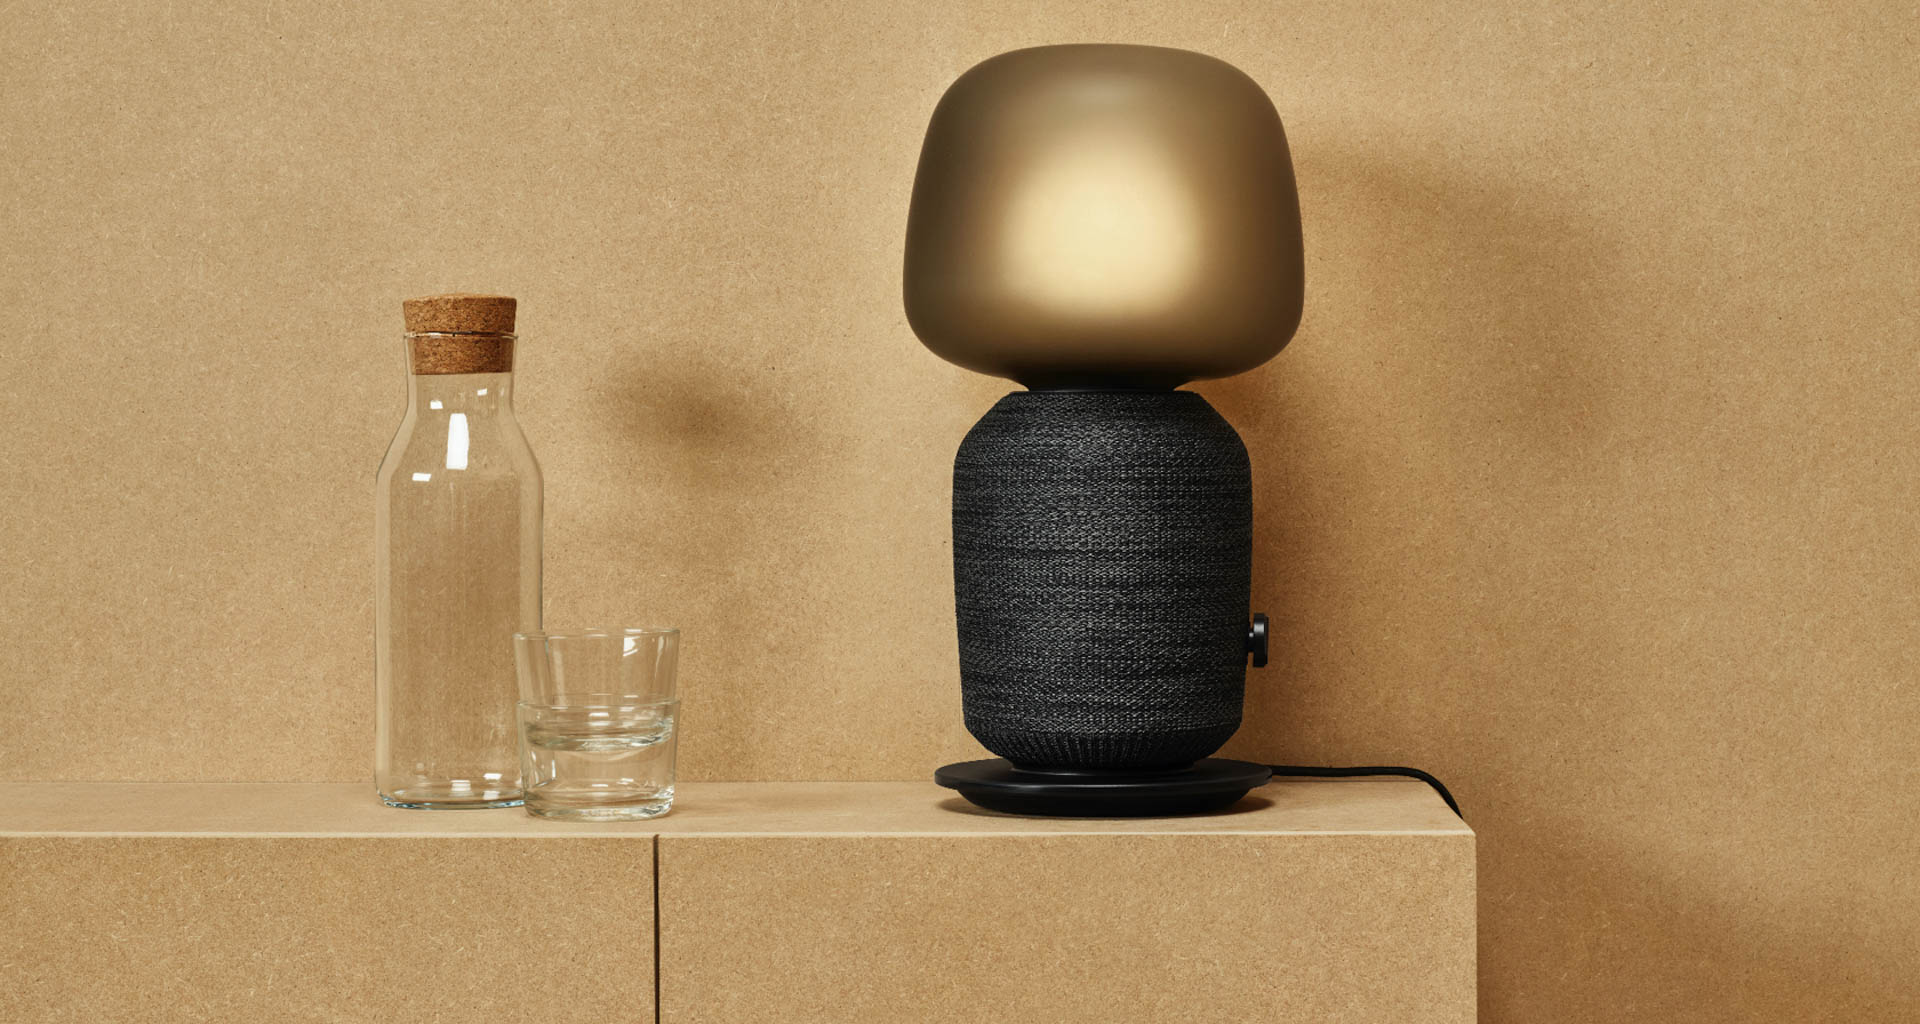 To be offered In a compact form factor, the IKEA Symfonisk table lamp with WiFi speaker will sell for $179. Image: IKEA.